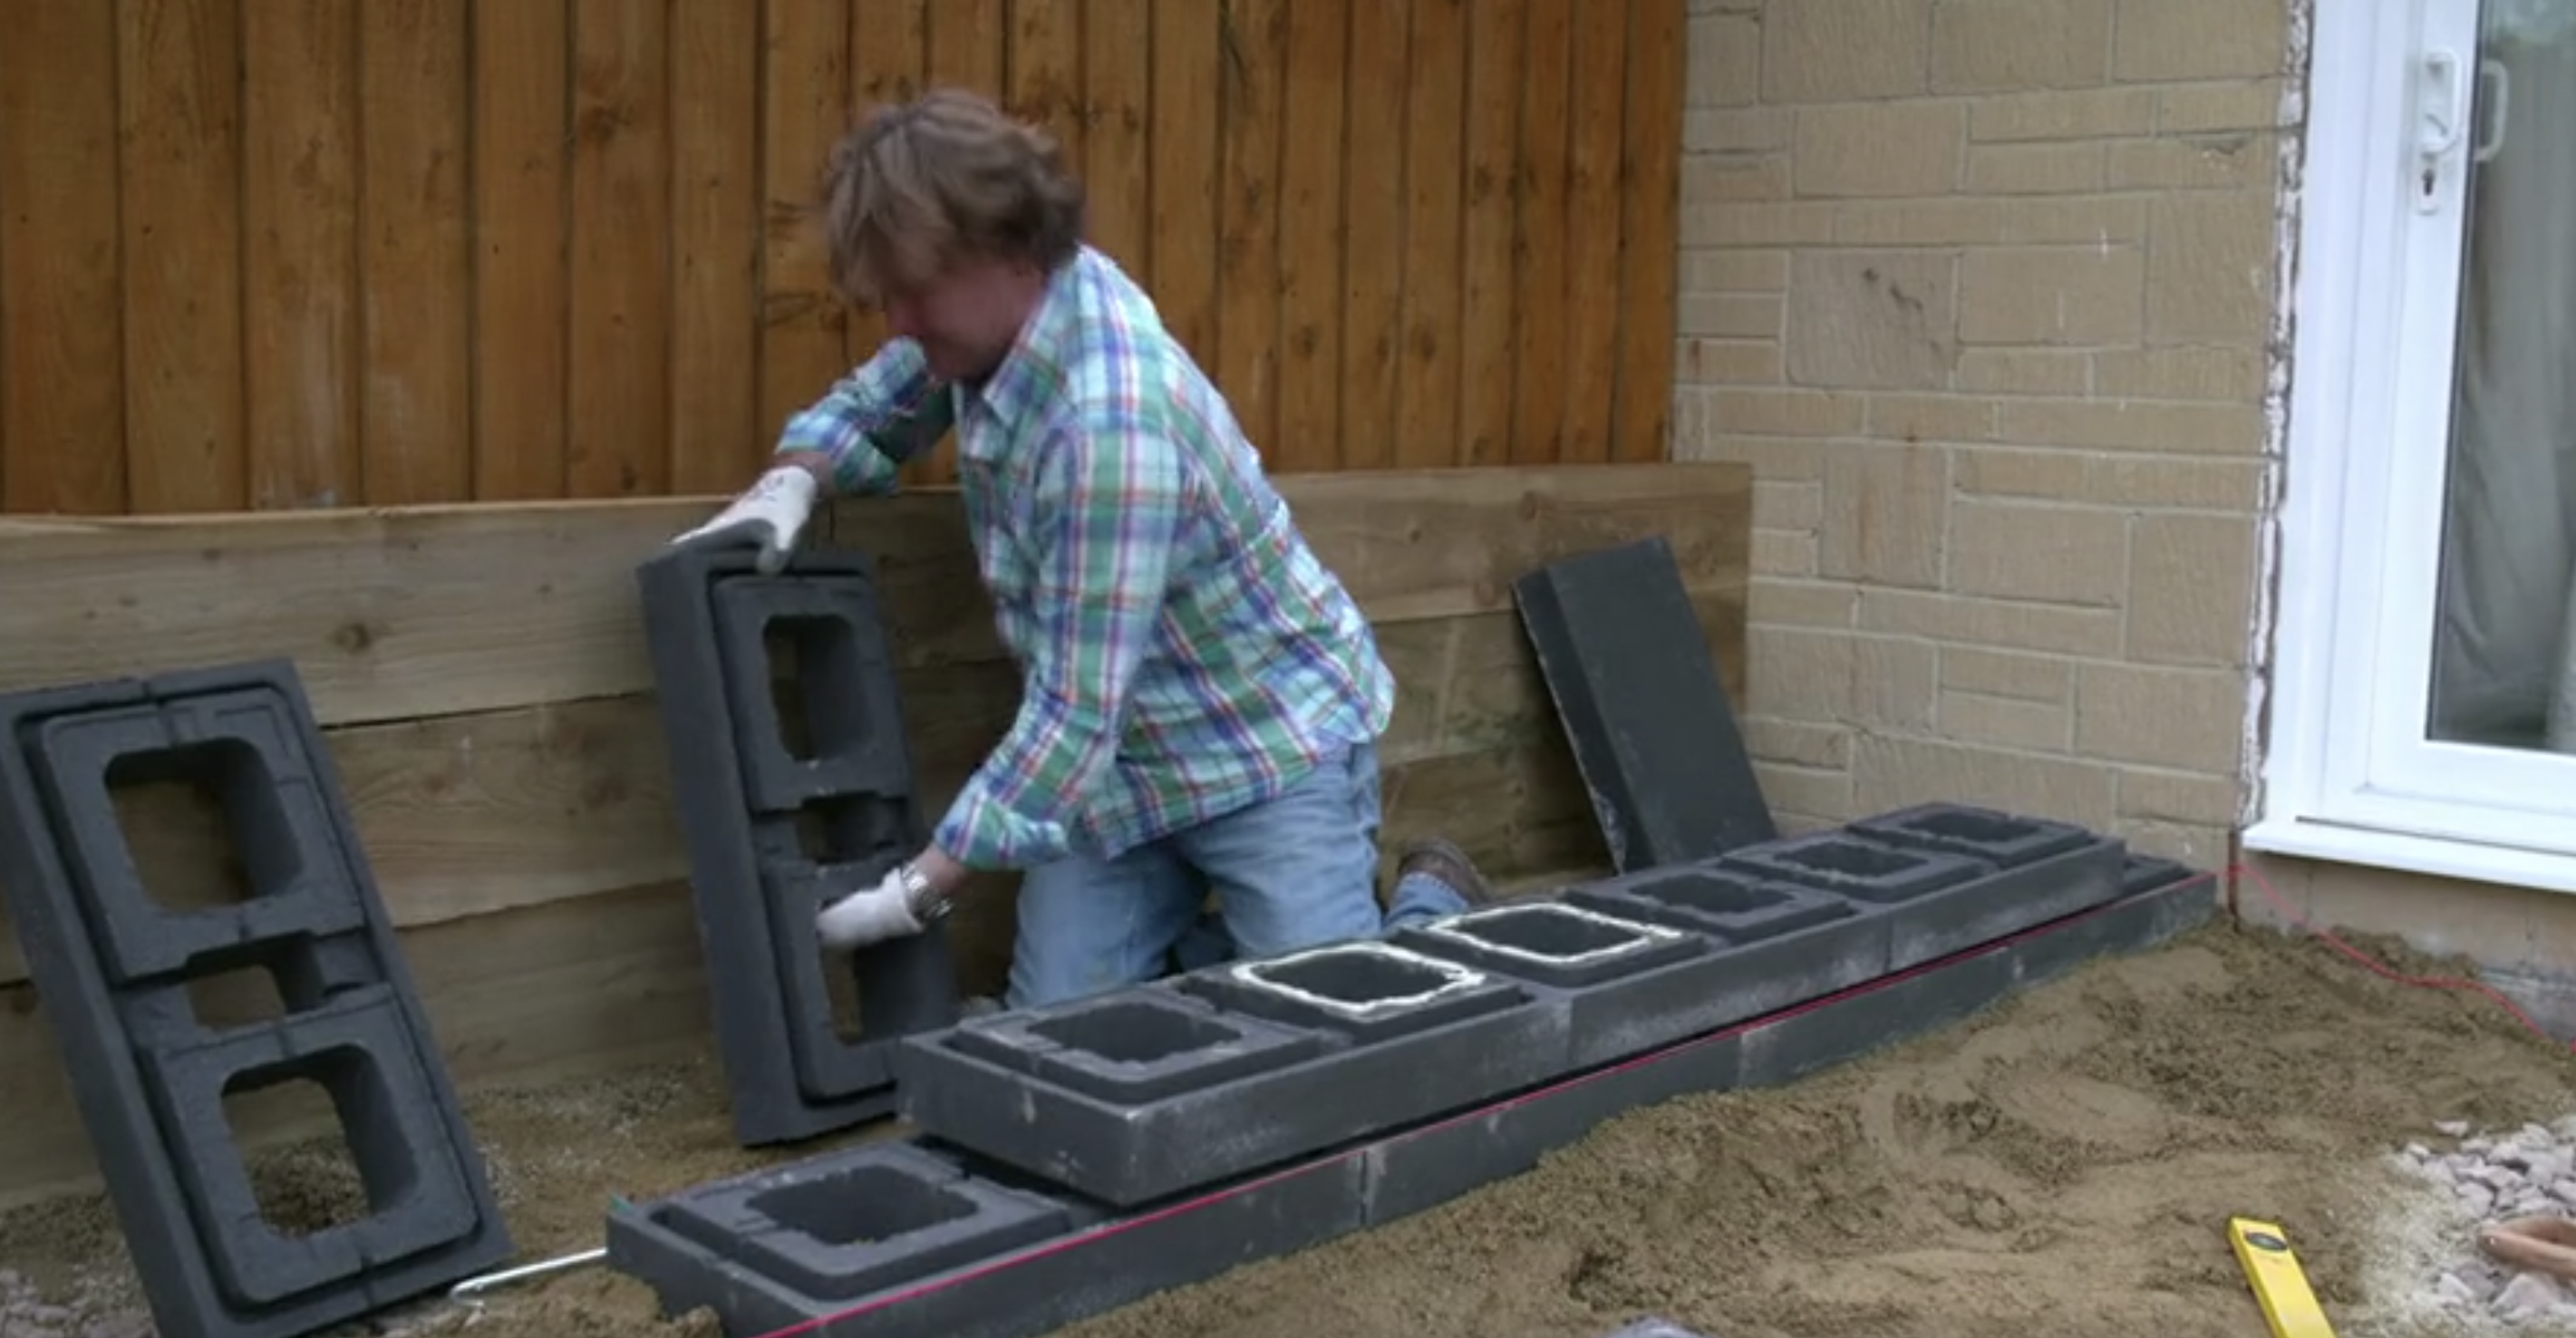 Love Your Garden: Make the raised beds from episode 6 - exact product to installation!